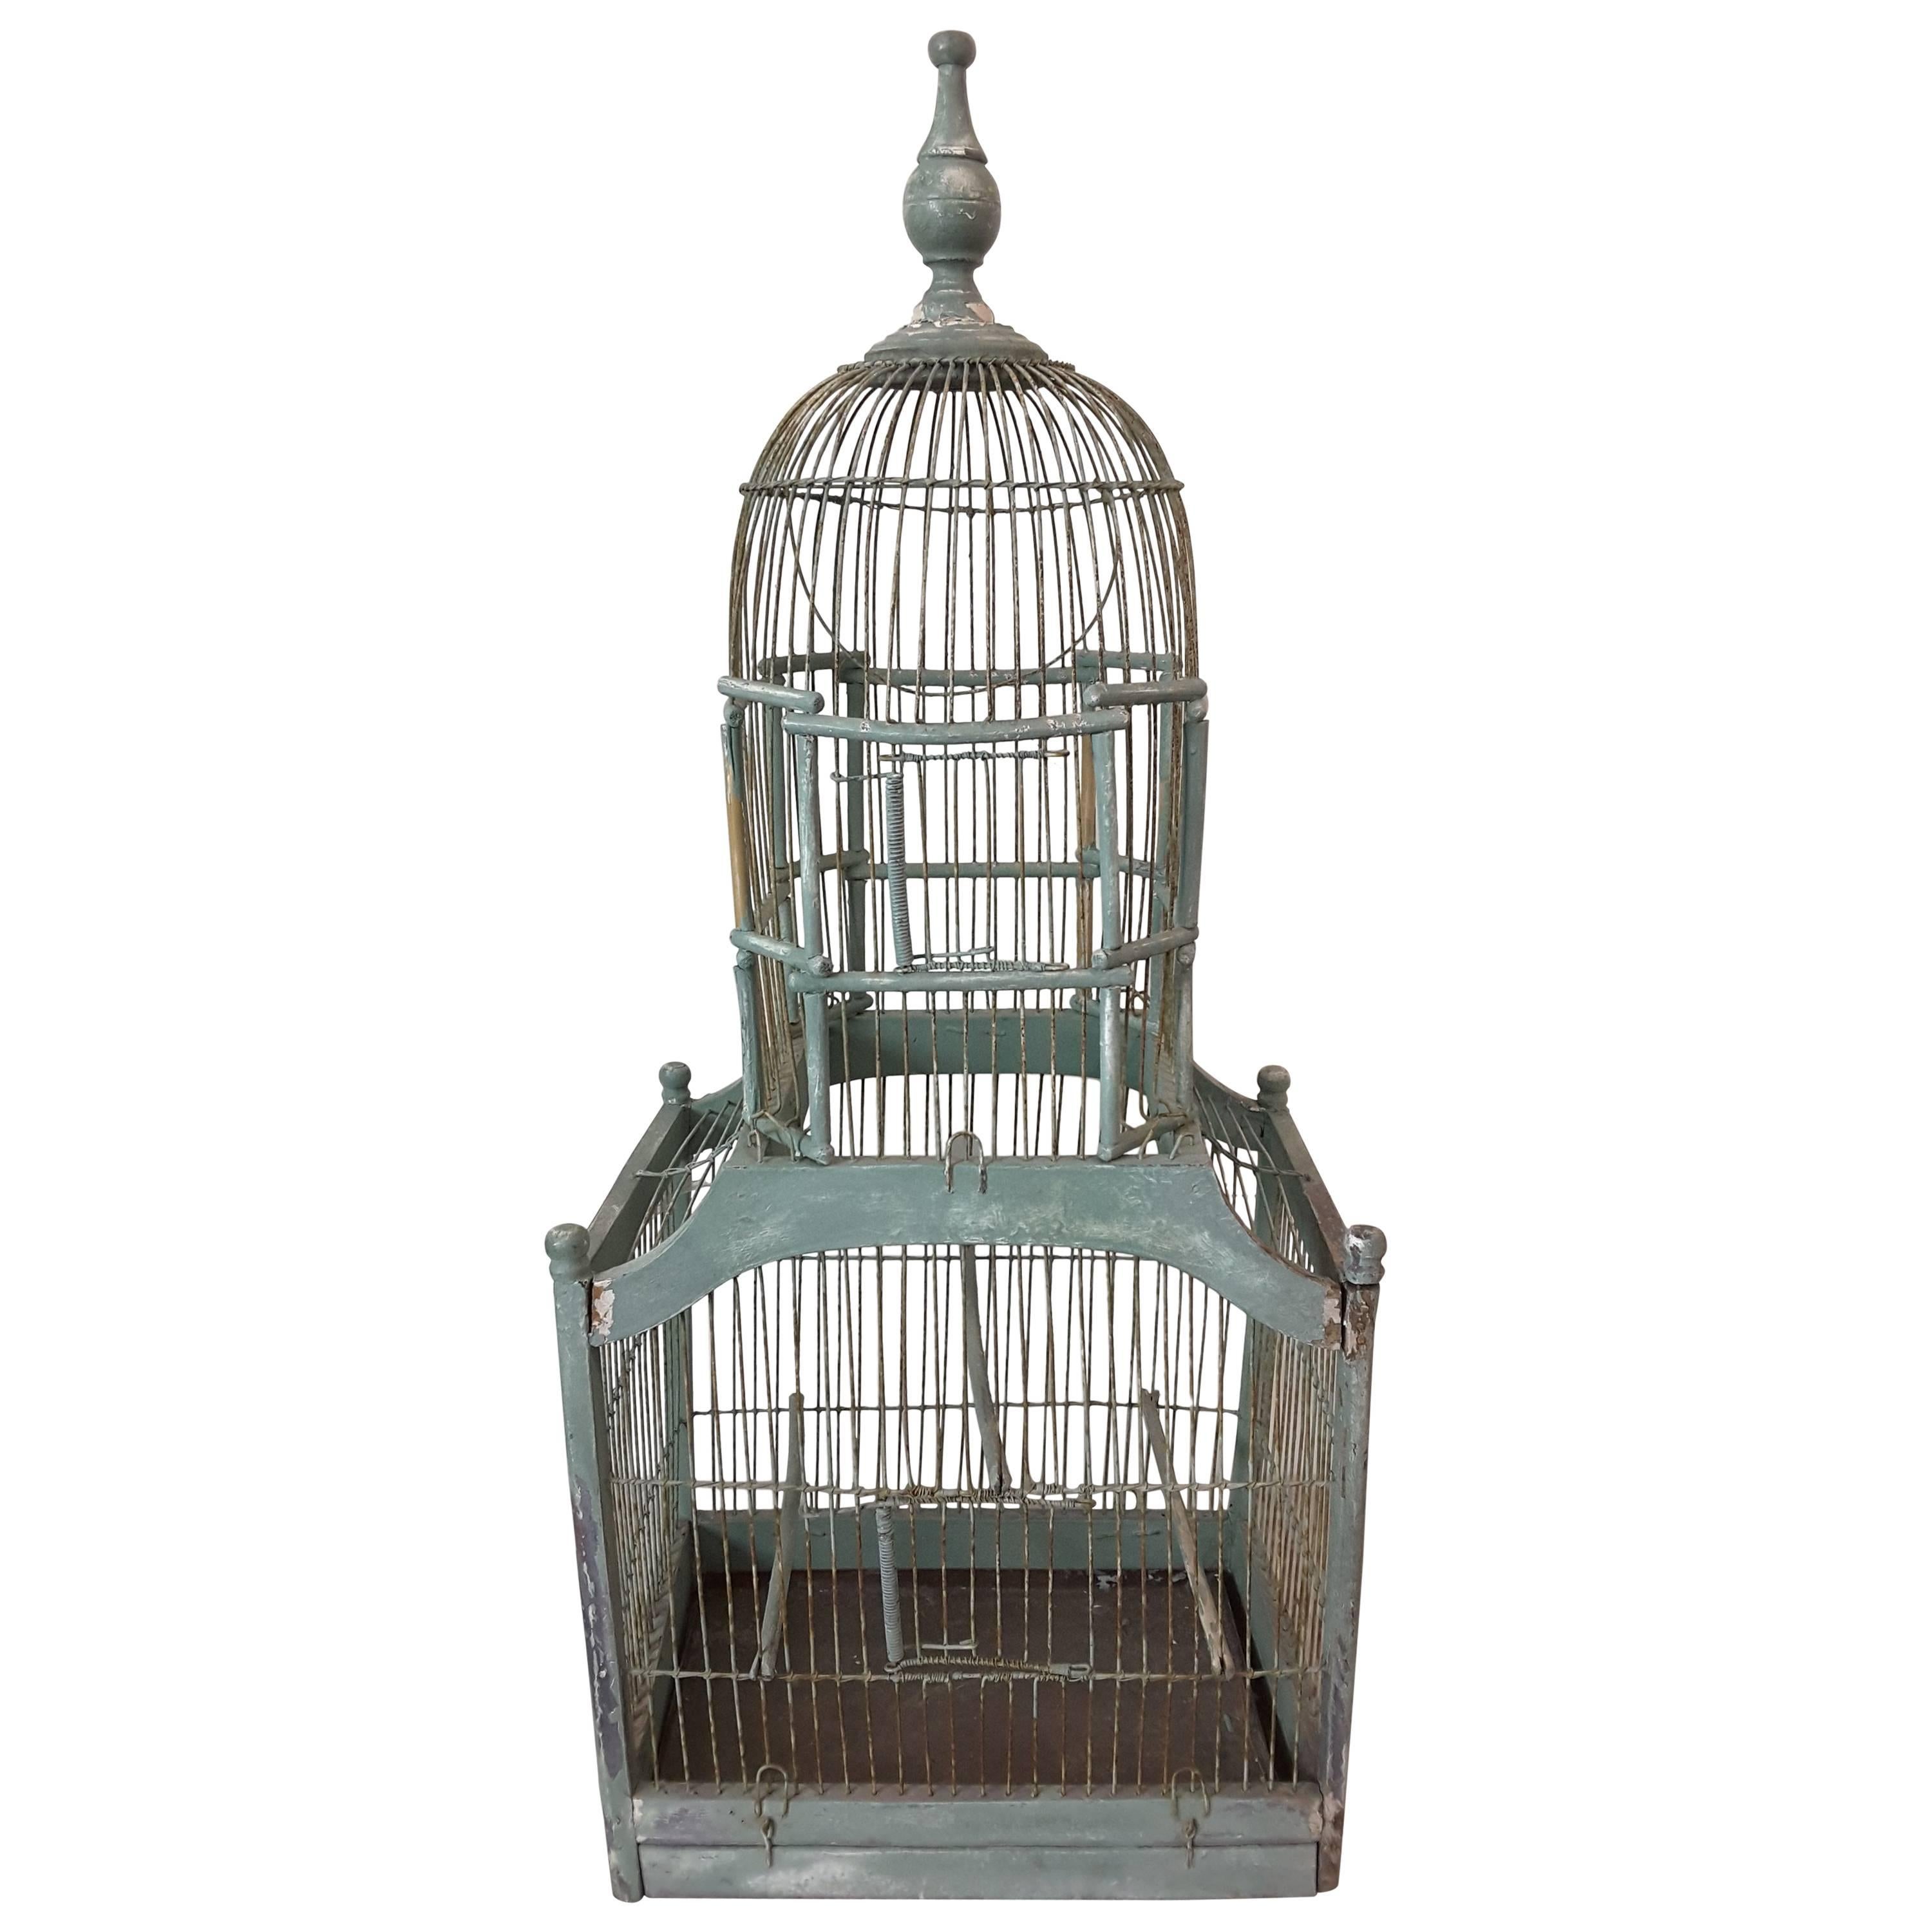 Victorian Cathedral Dome Bird Cage in Original Green Paint, circa 1880